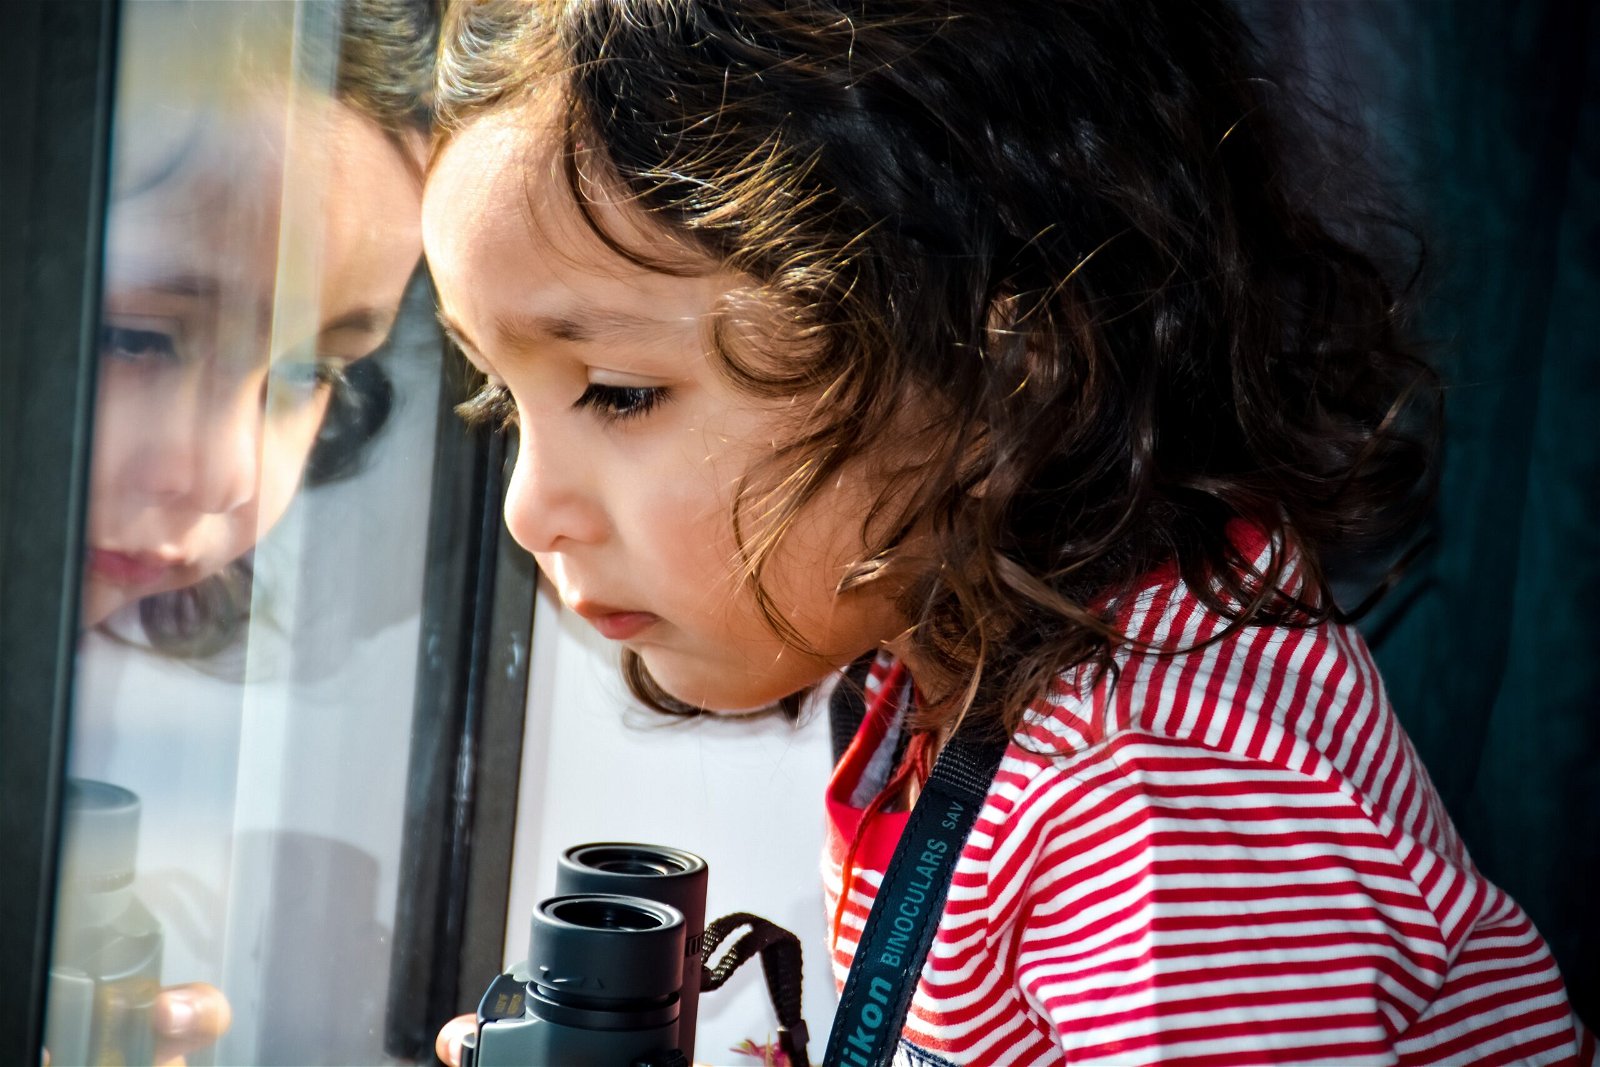 A child looking out the window with binoculars for a kids photo pose